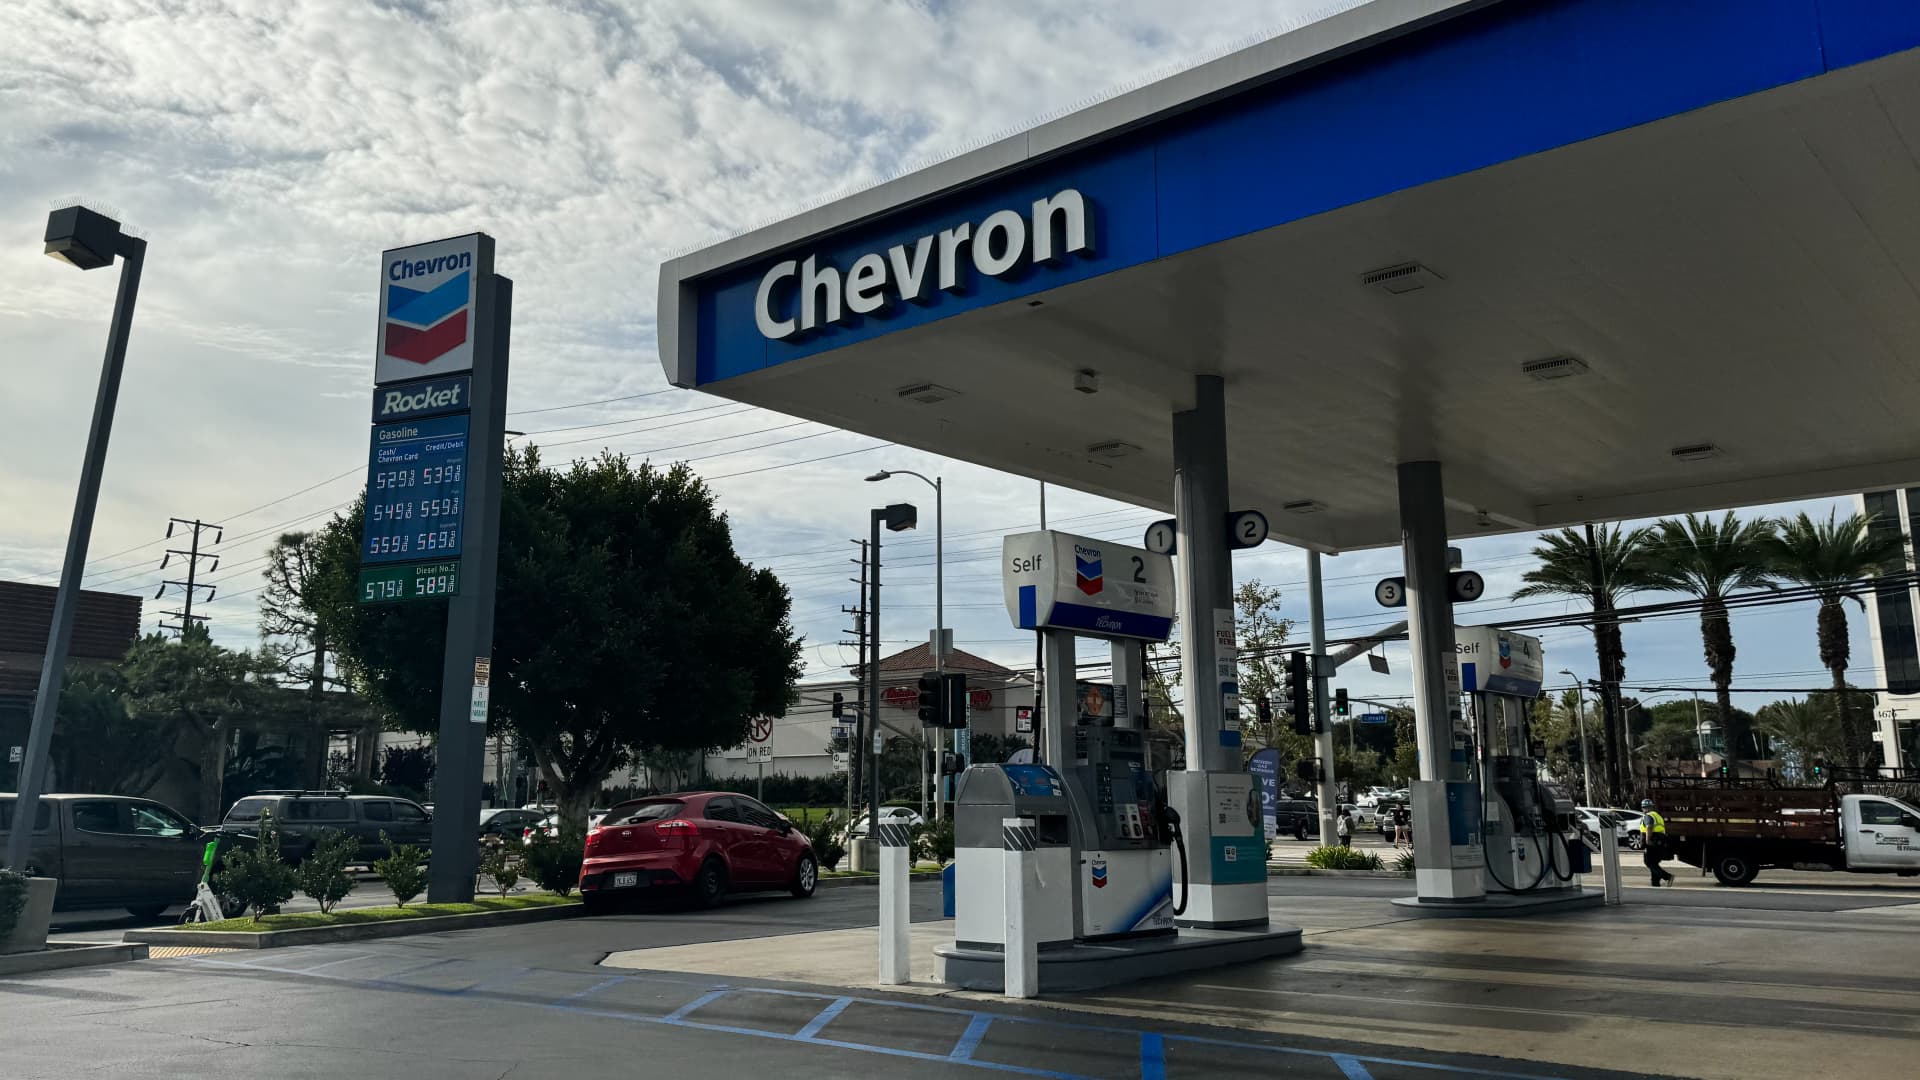 The Chevron logo is seen at a gas station in Los Angeles.